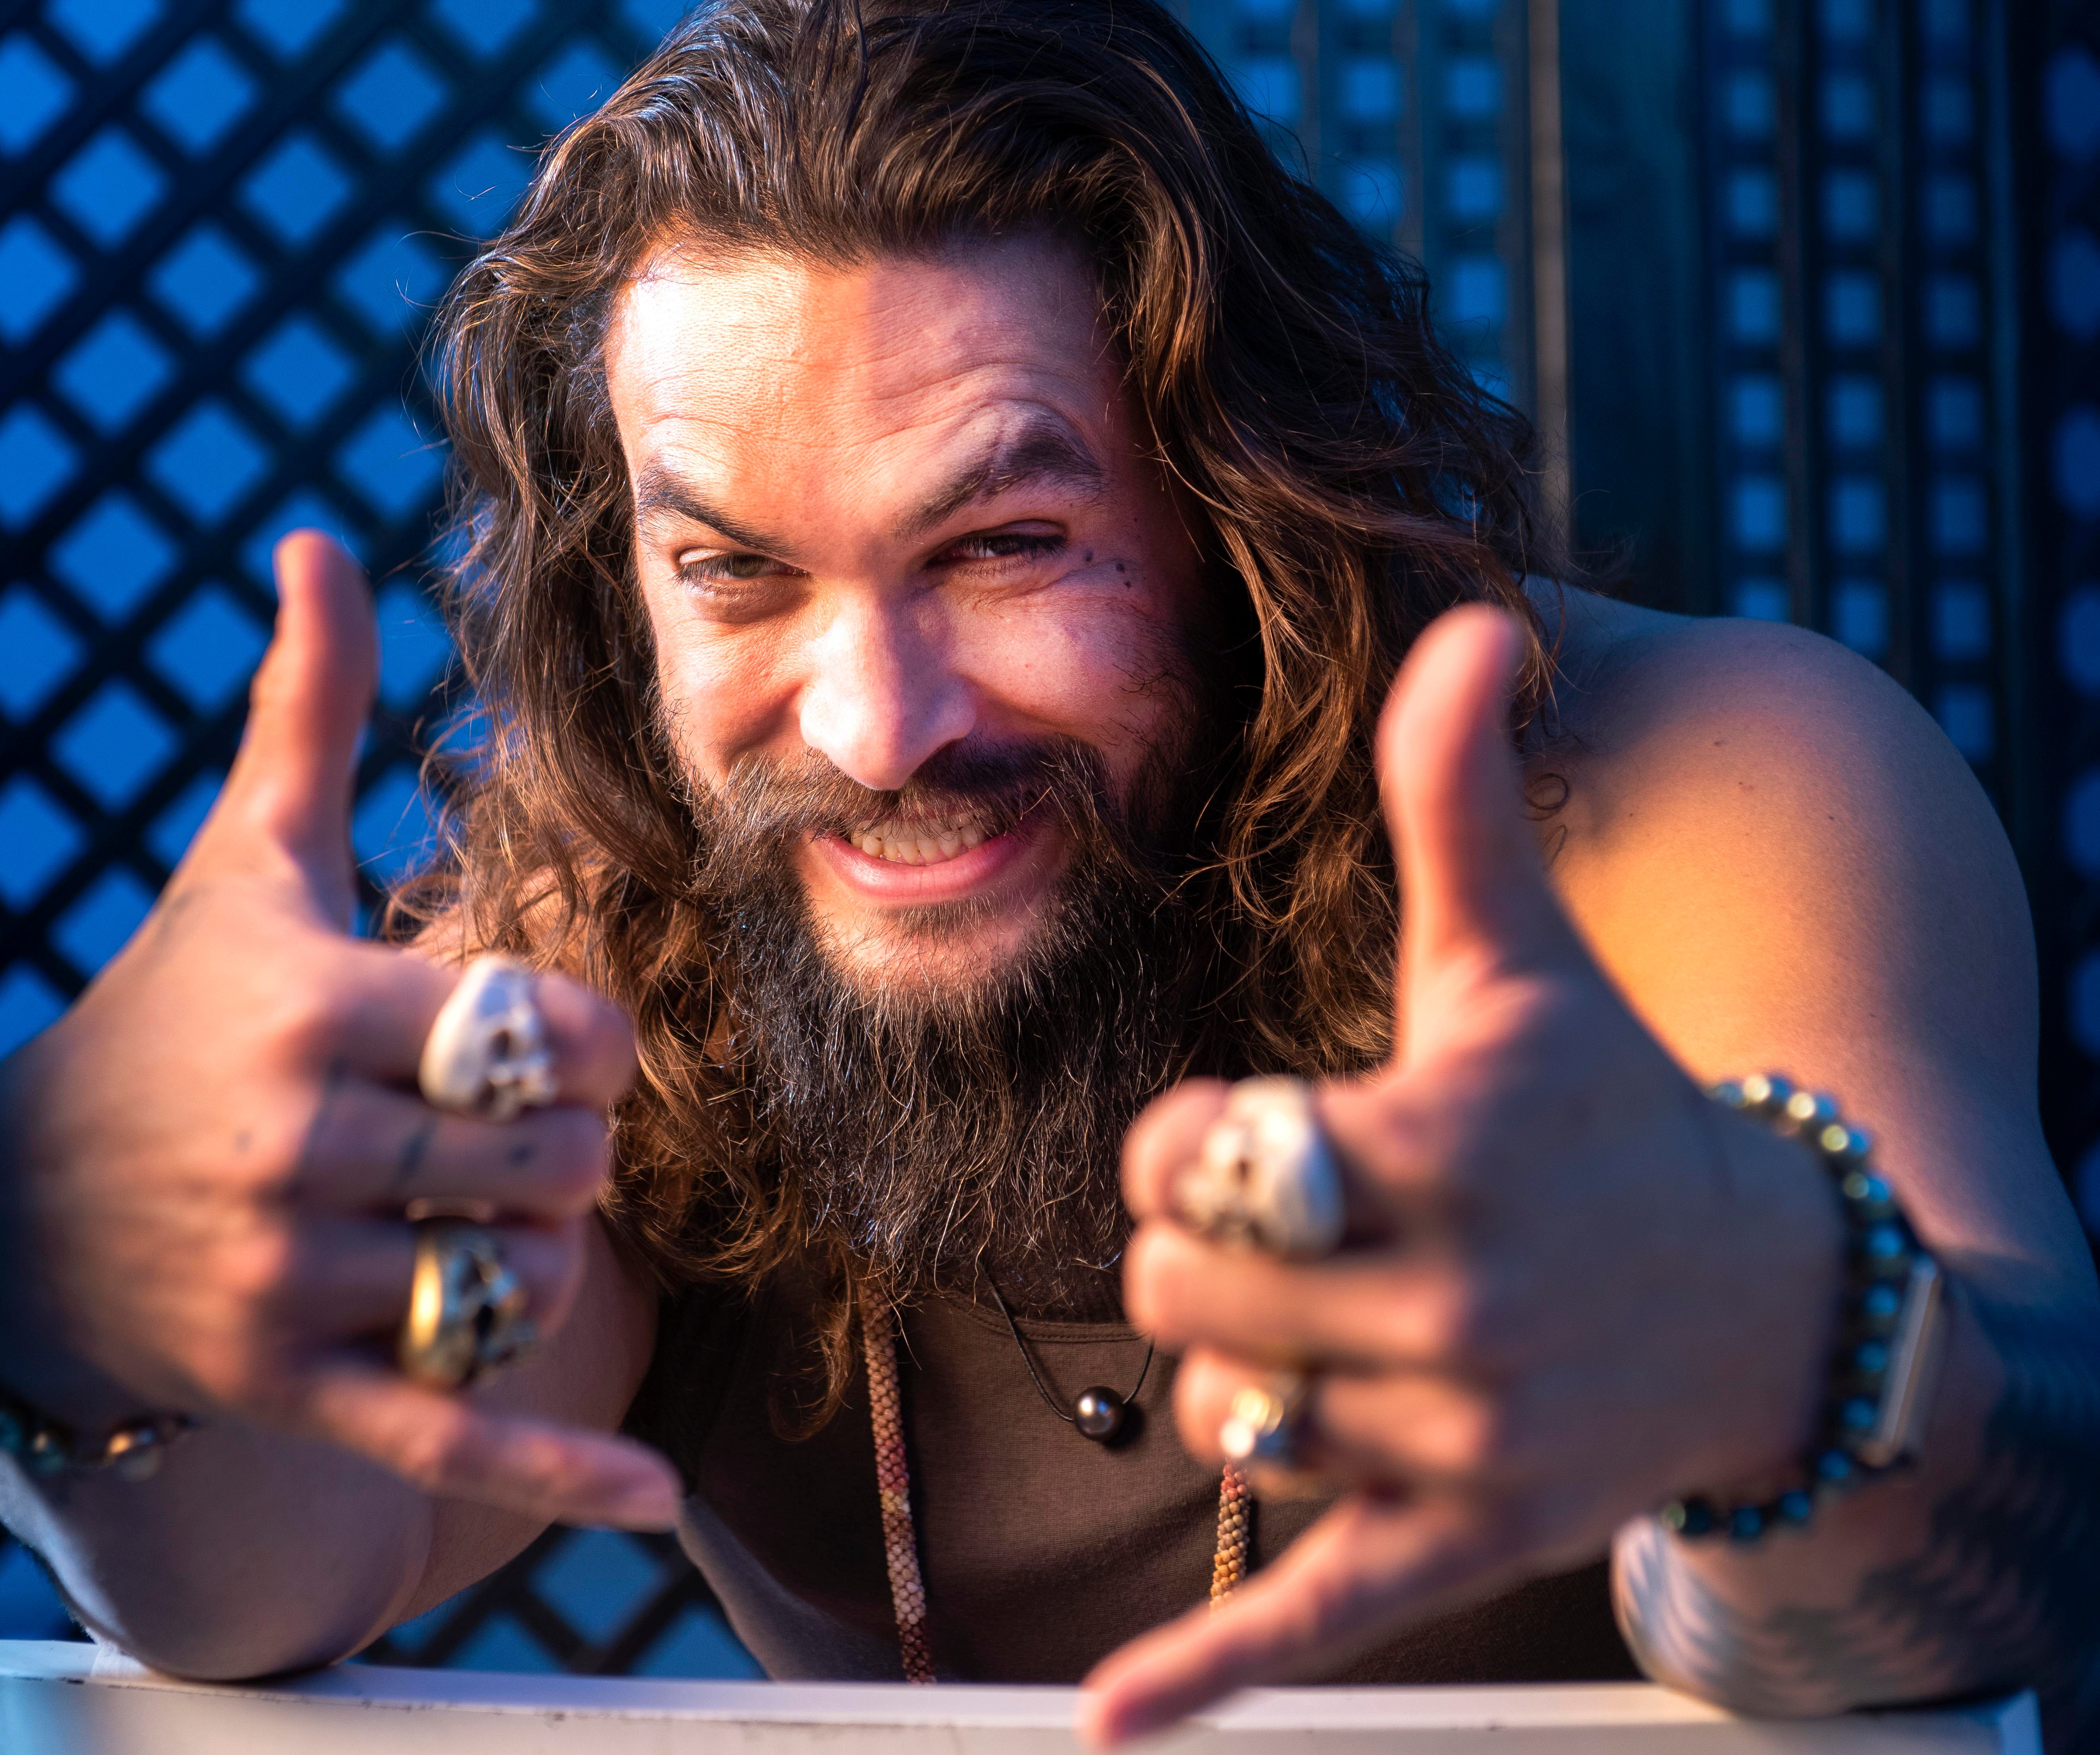 Jason Momoa shares 'Game of Thrones' pic from when he was too 'broke to fly home' - USA TODAY